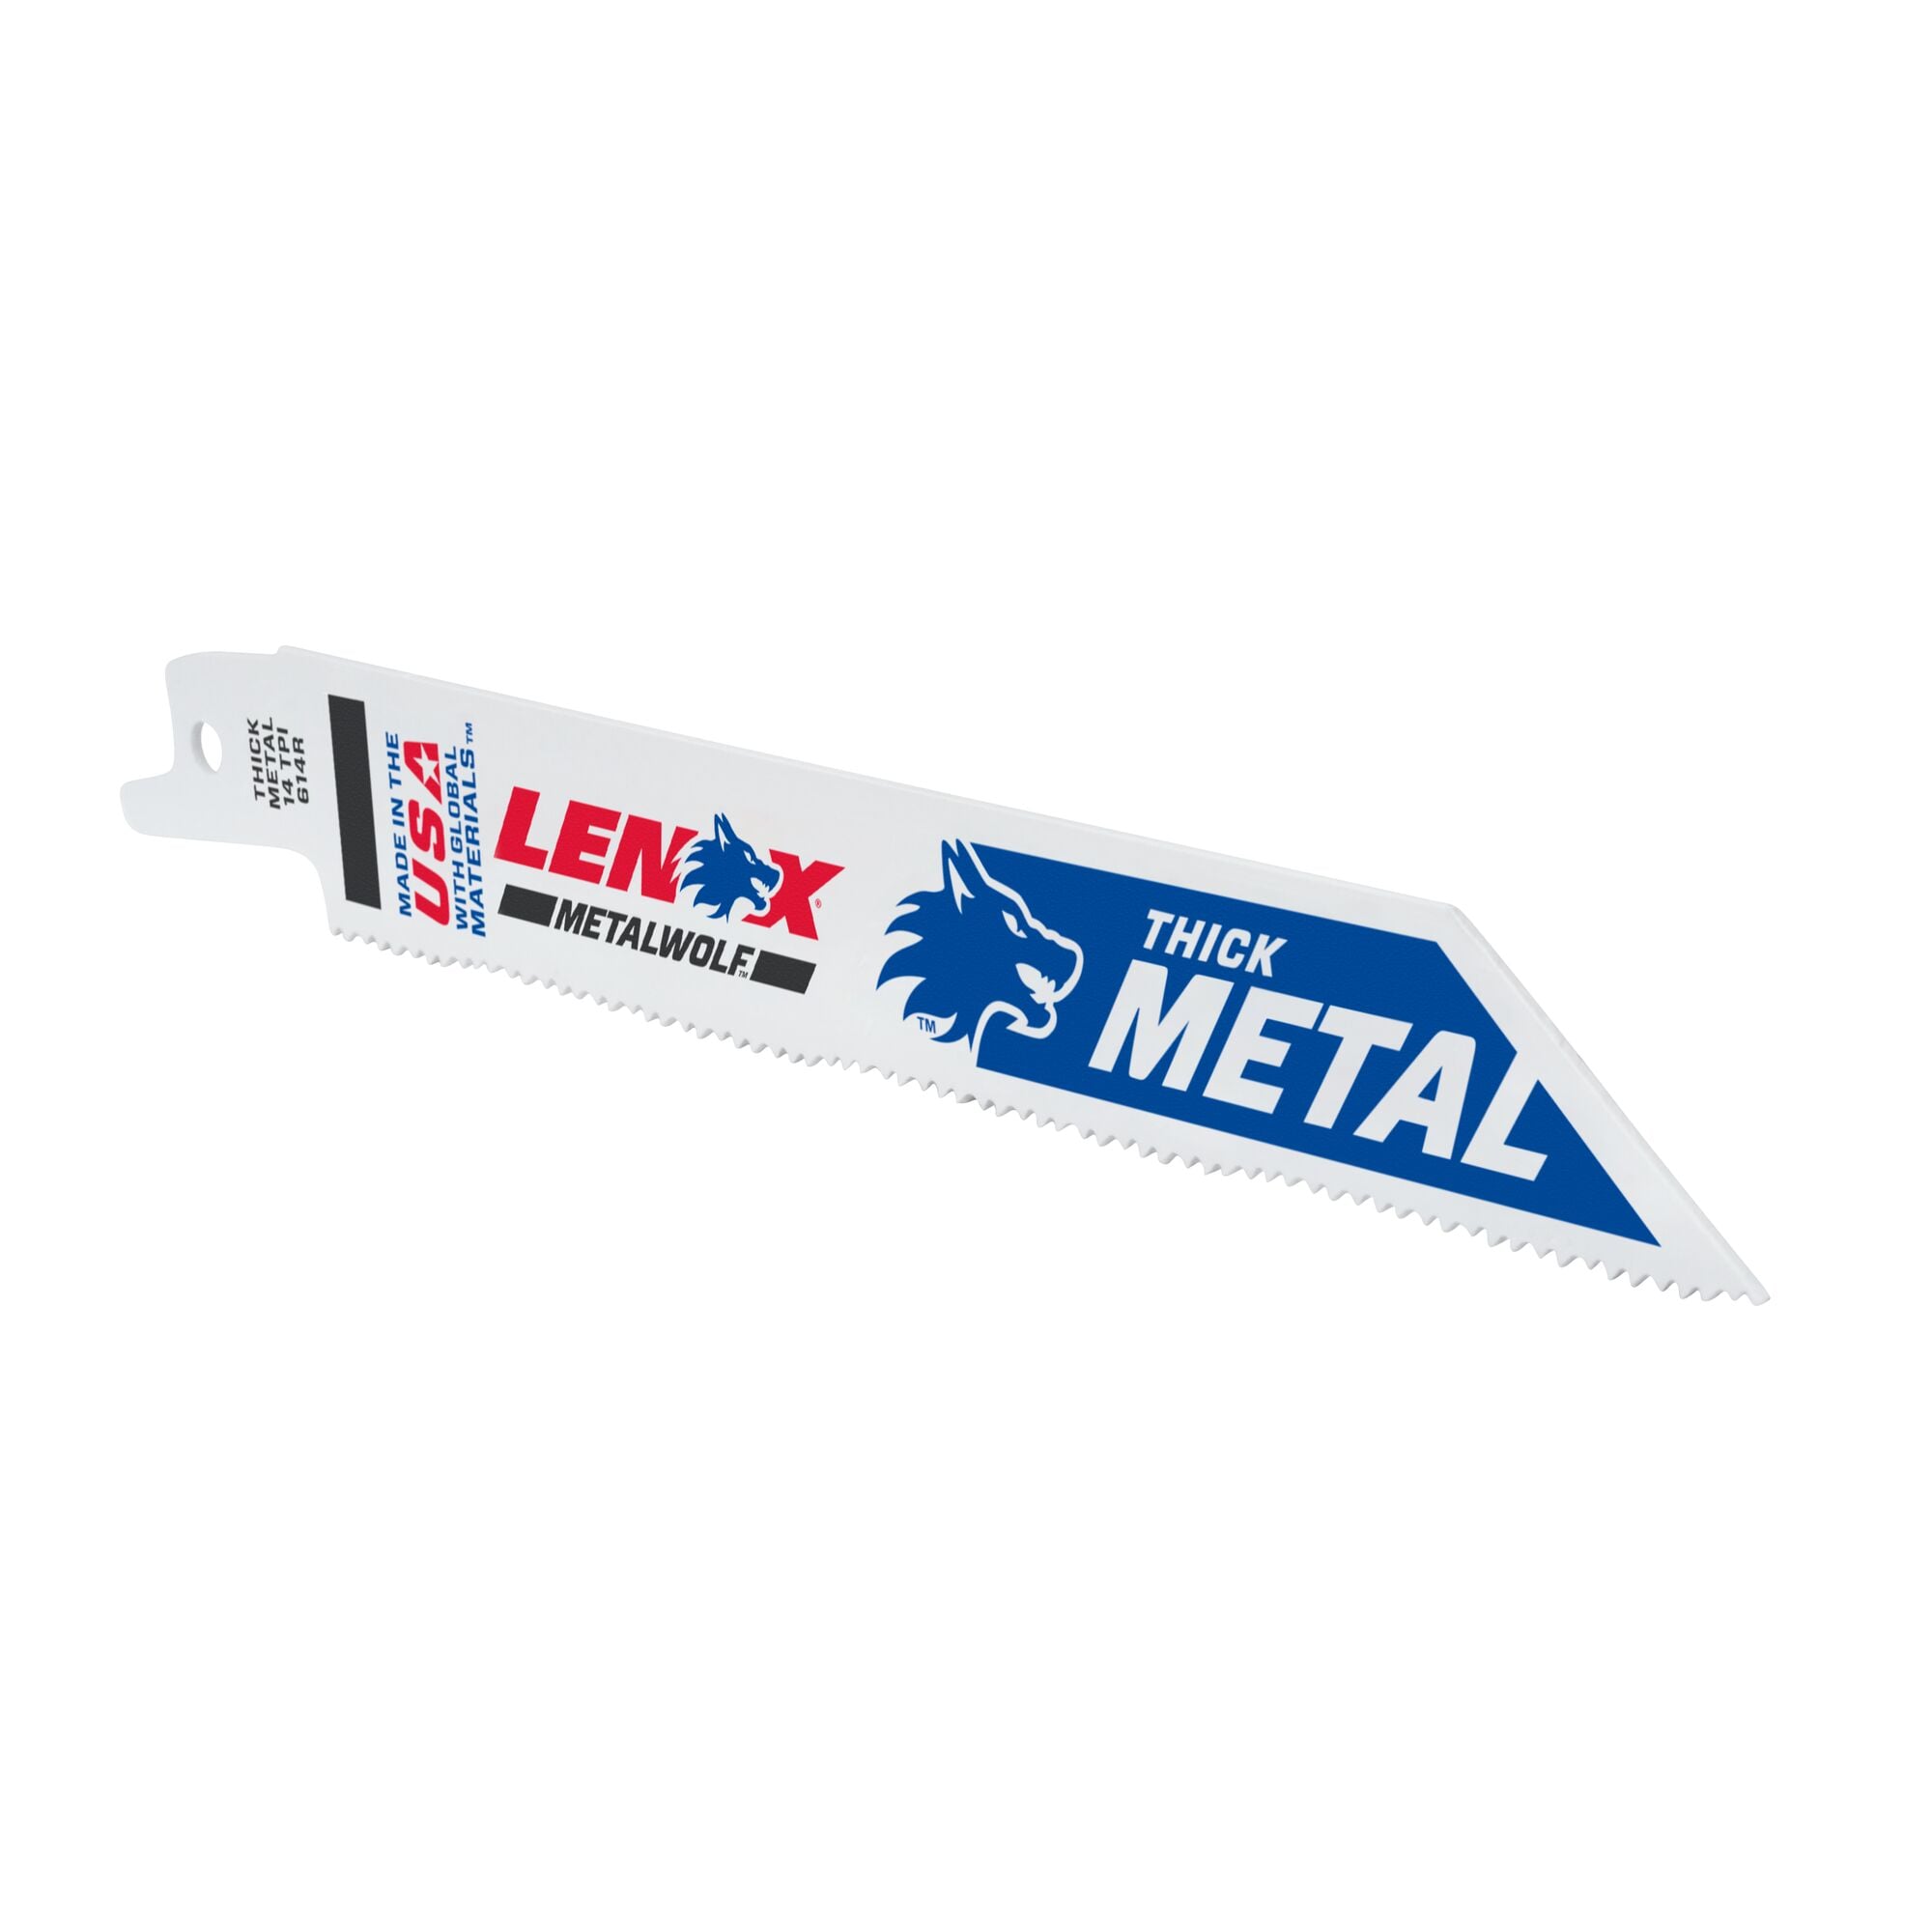 LENOX METALWOLF Bi-metal 6-in 14-TPI Metal Cutting Reciprocating Saw Blade  (5-Pack) in the Reciprocating Saw Blades department at